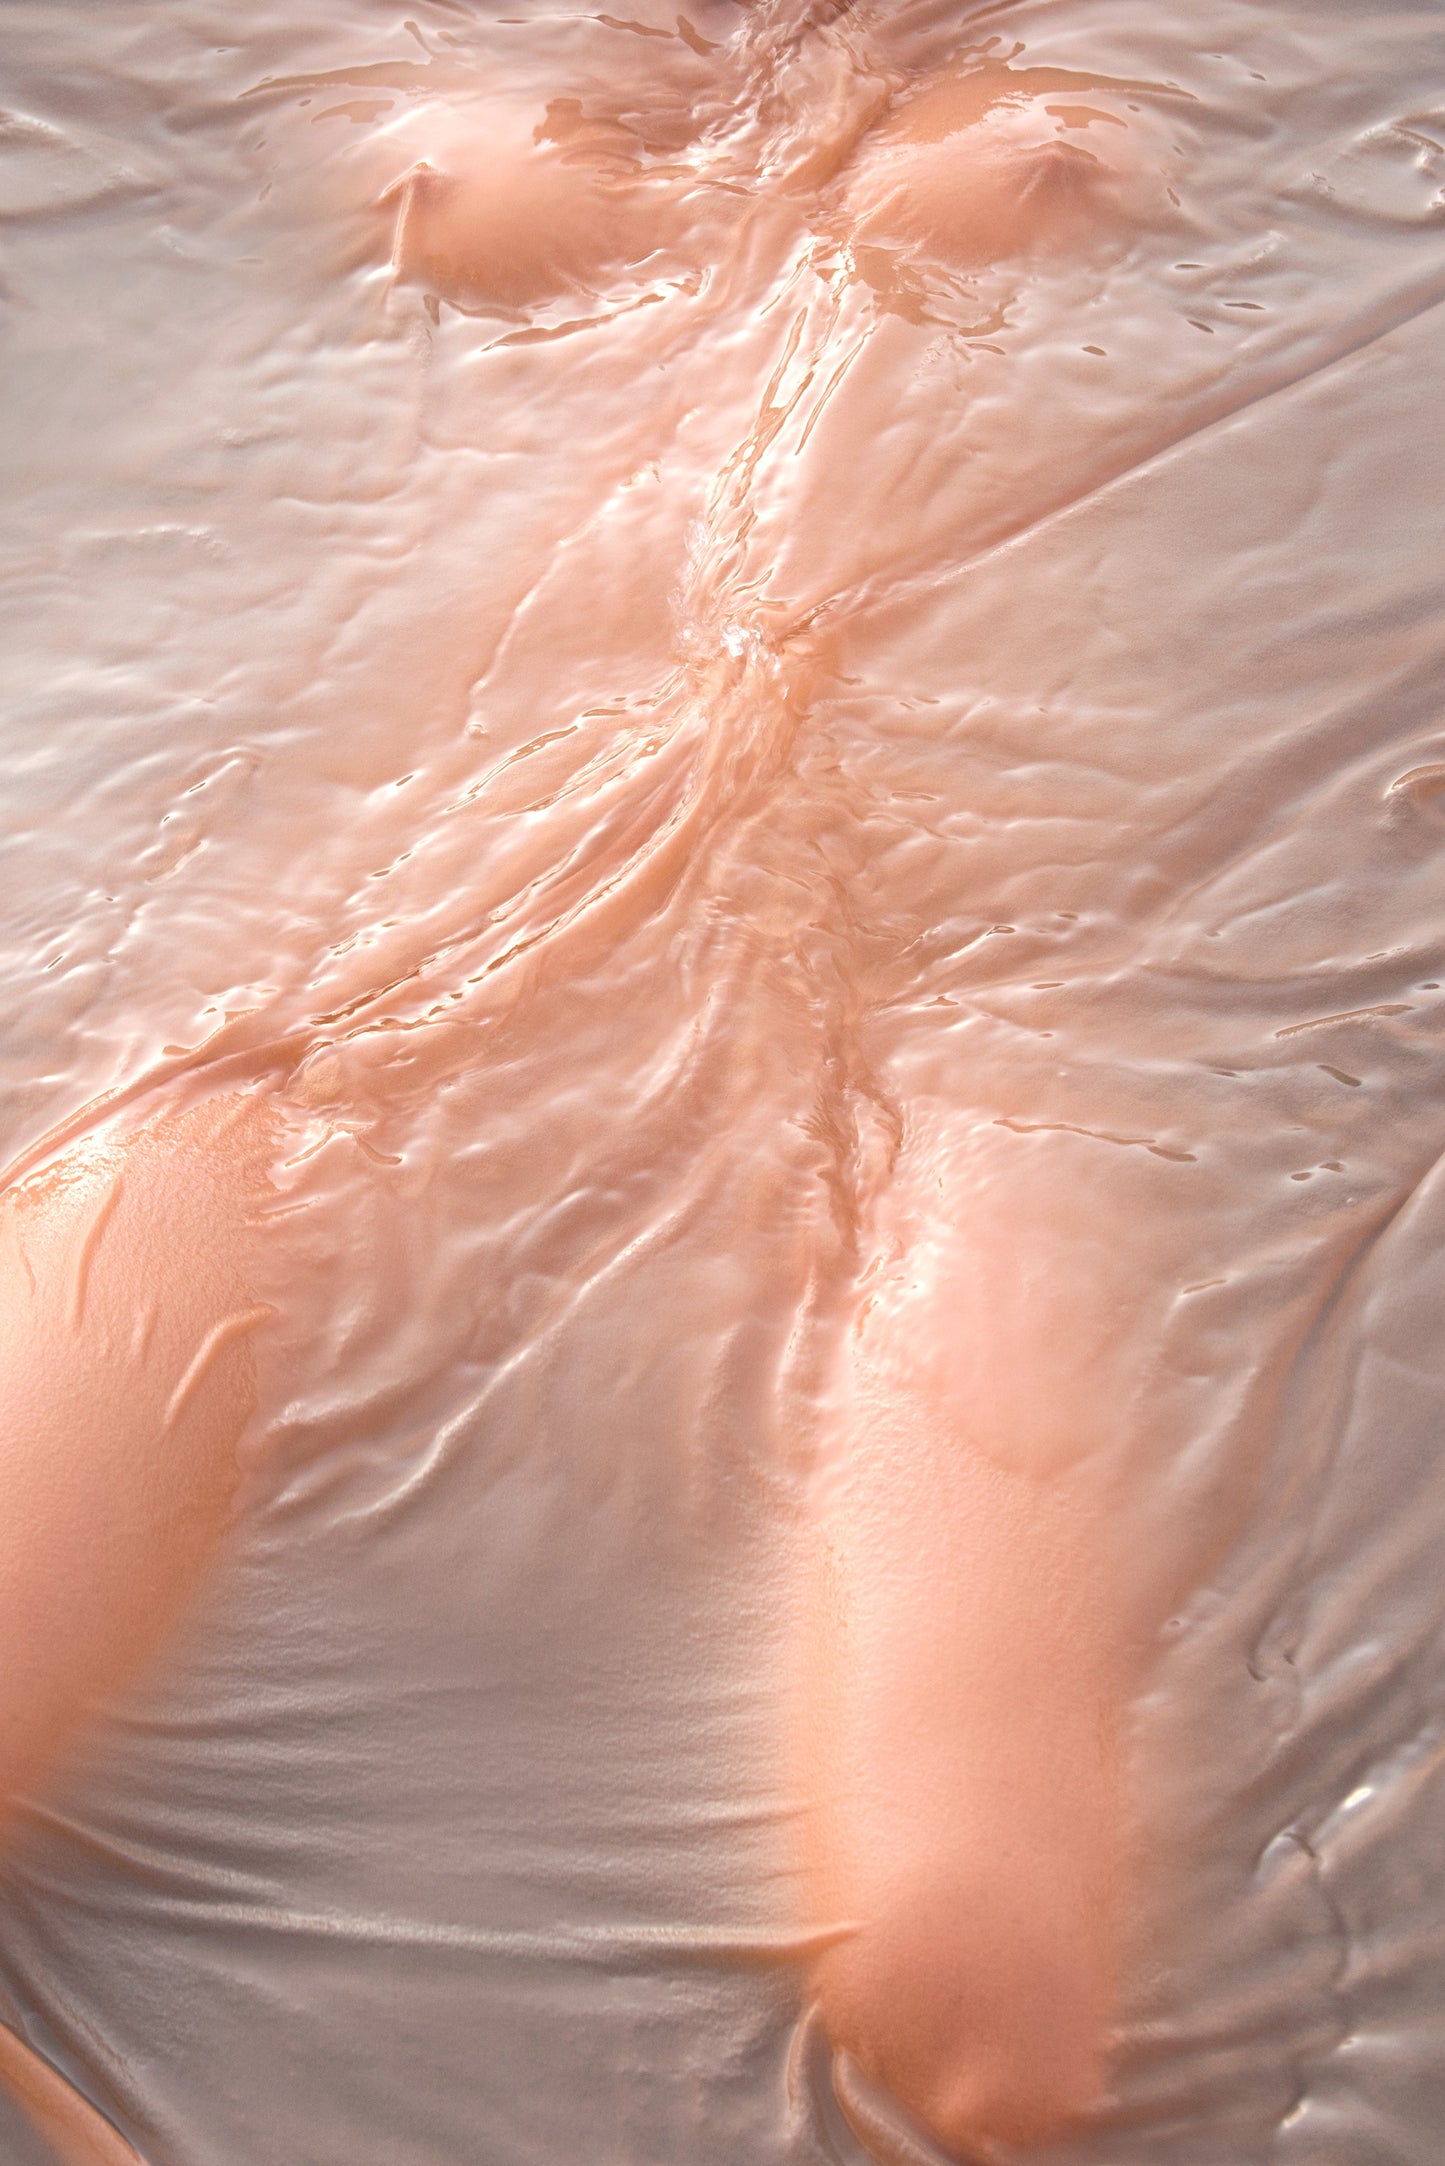 Wax Diptych by Honey Long & Prue Stent